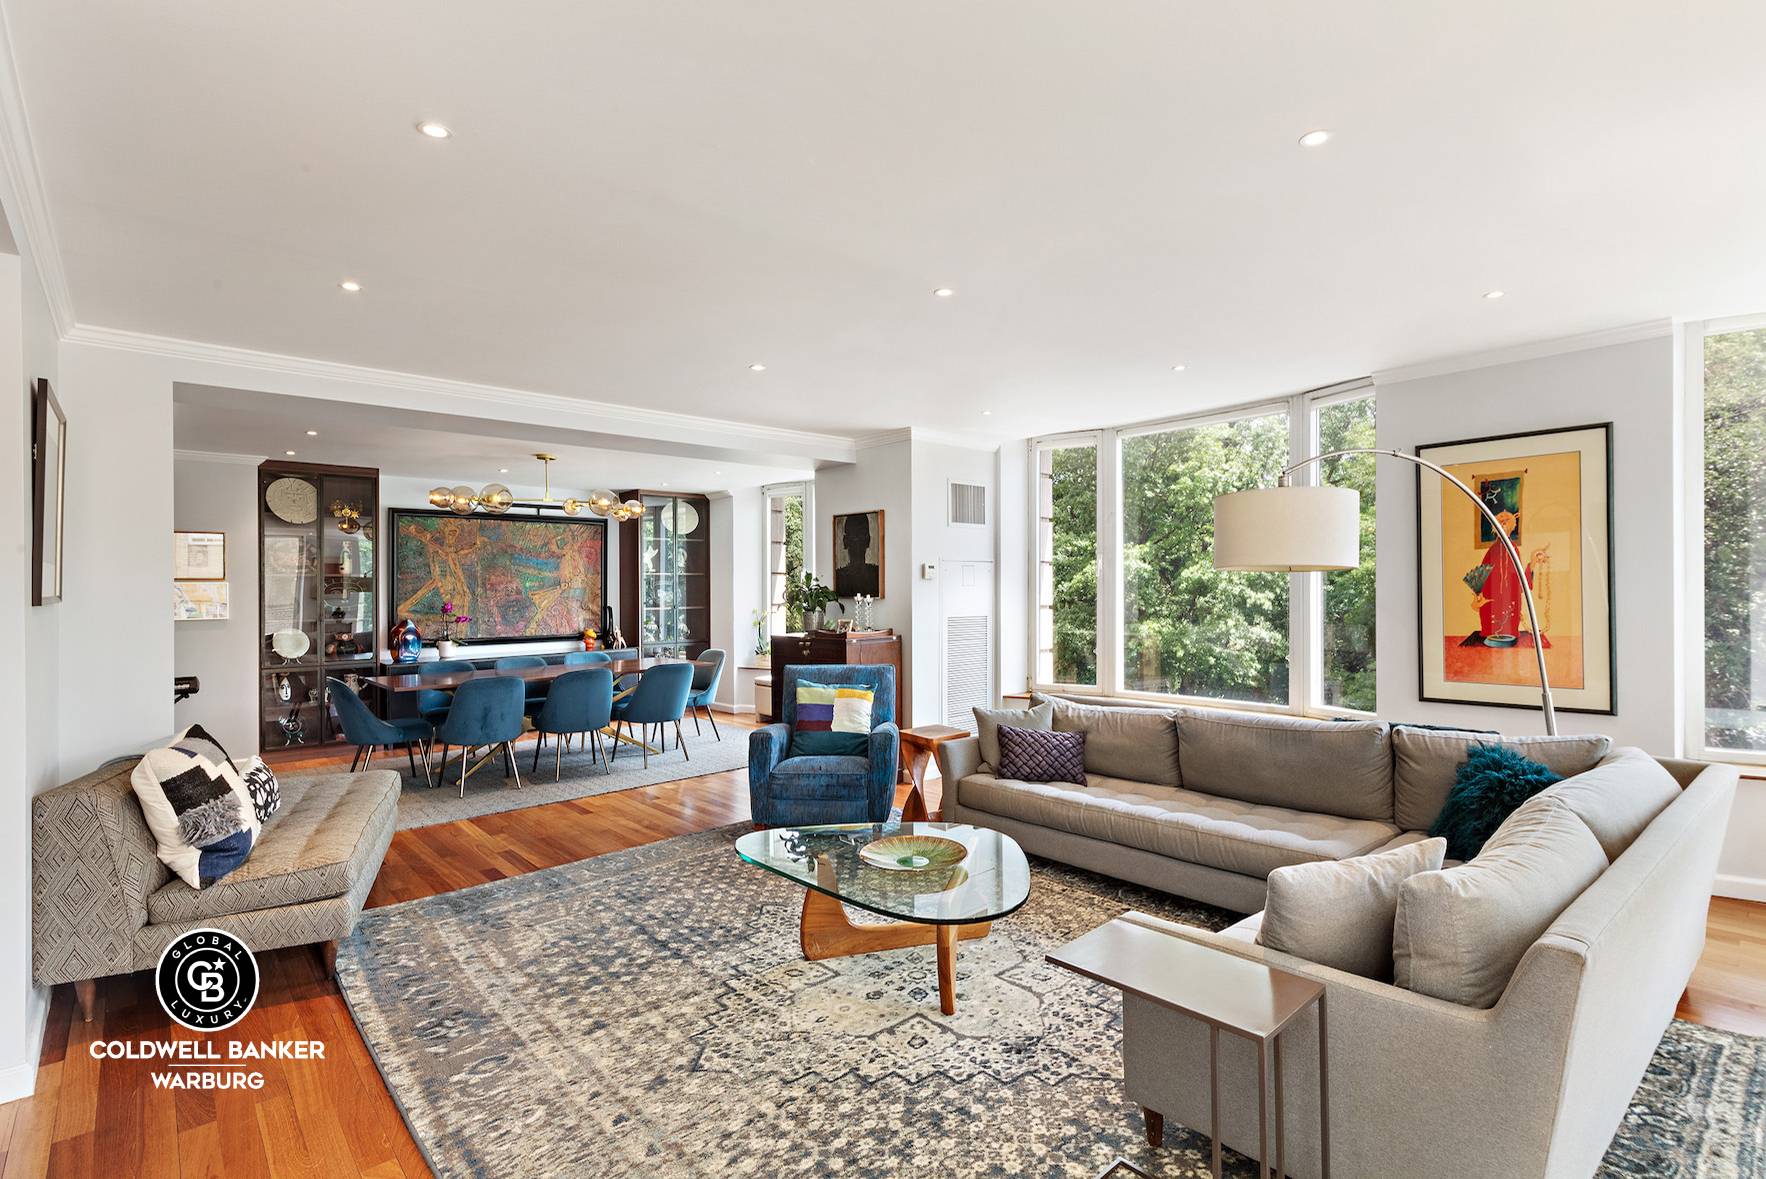 Central Park views from every window of this beautifully renovated, sprawling 3 bedroom, 3.